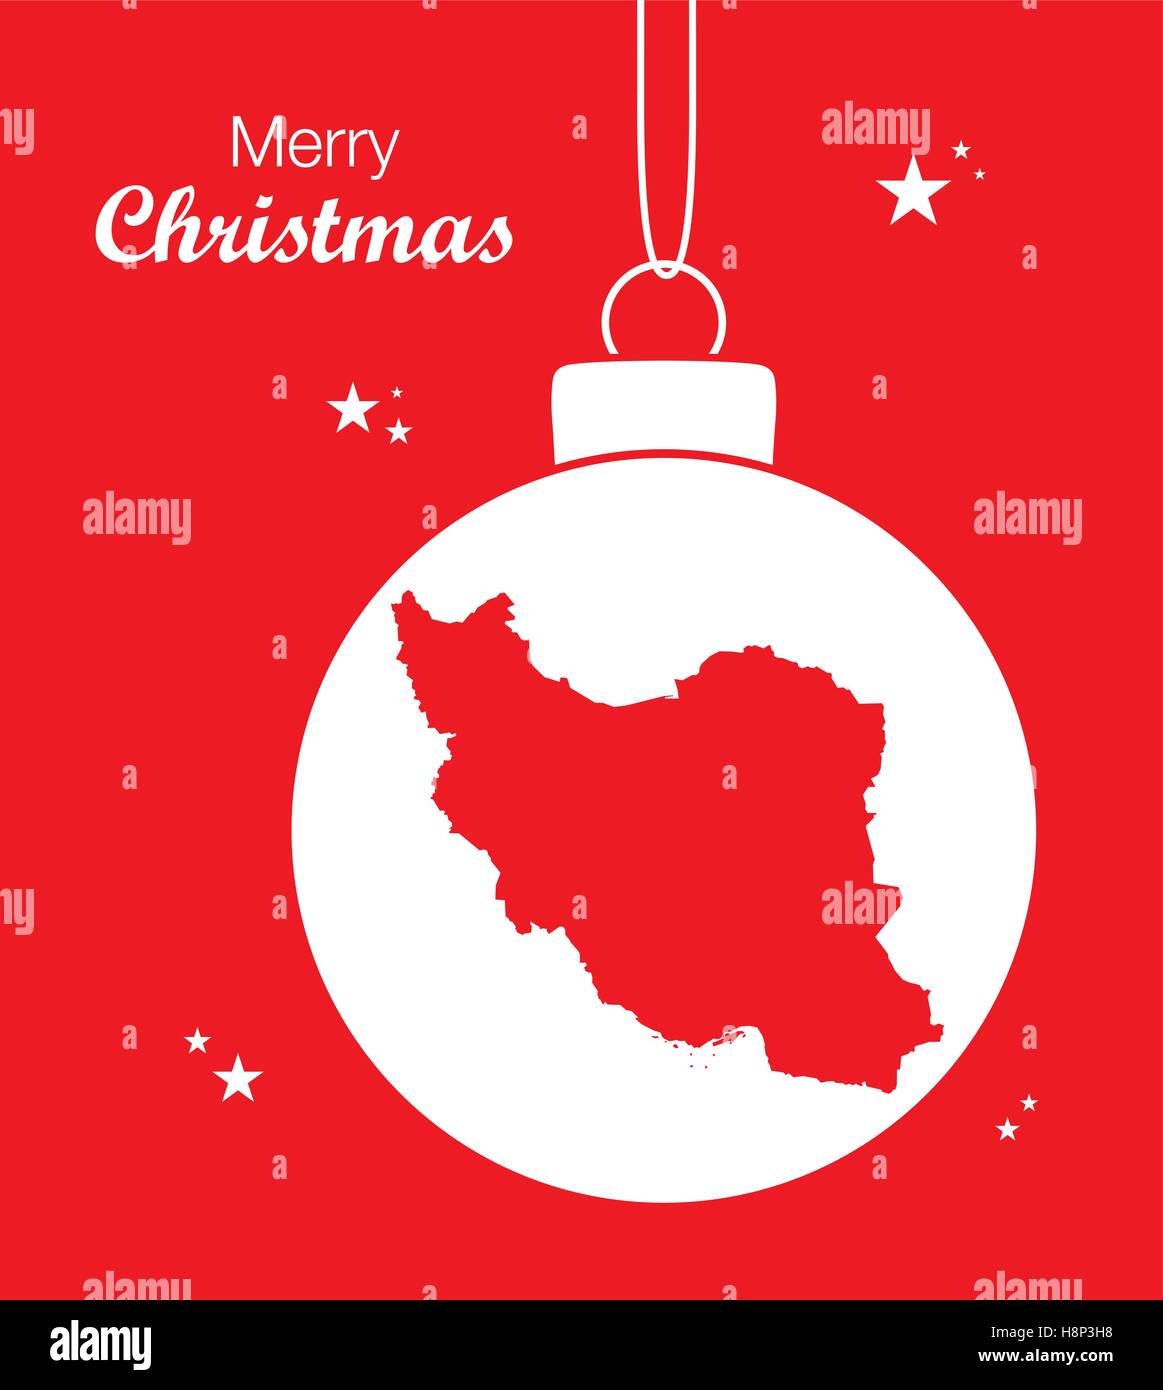 Merry Christmas illustration theme with map of Iran Stock Vector